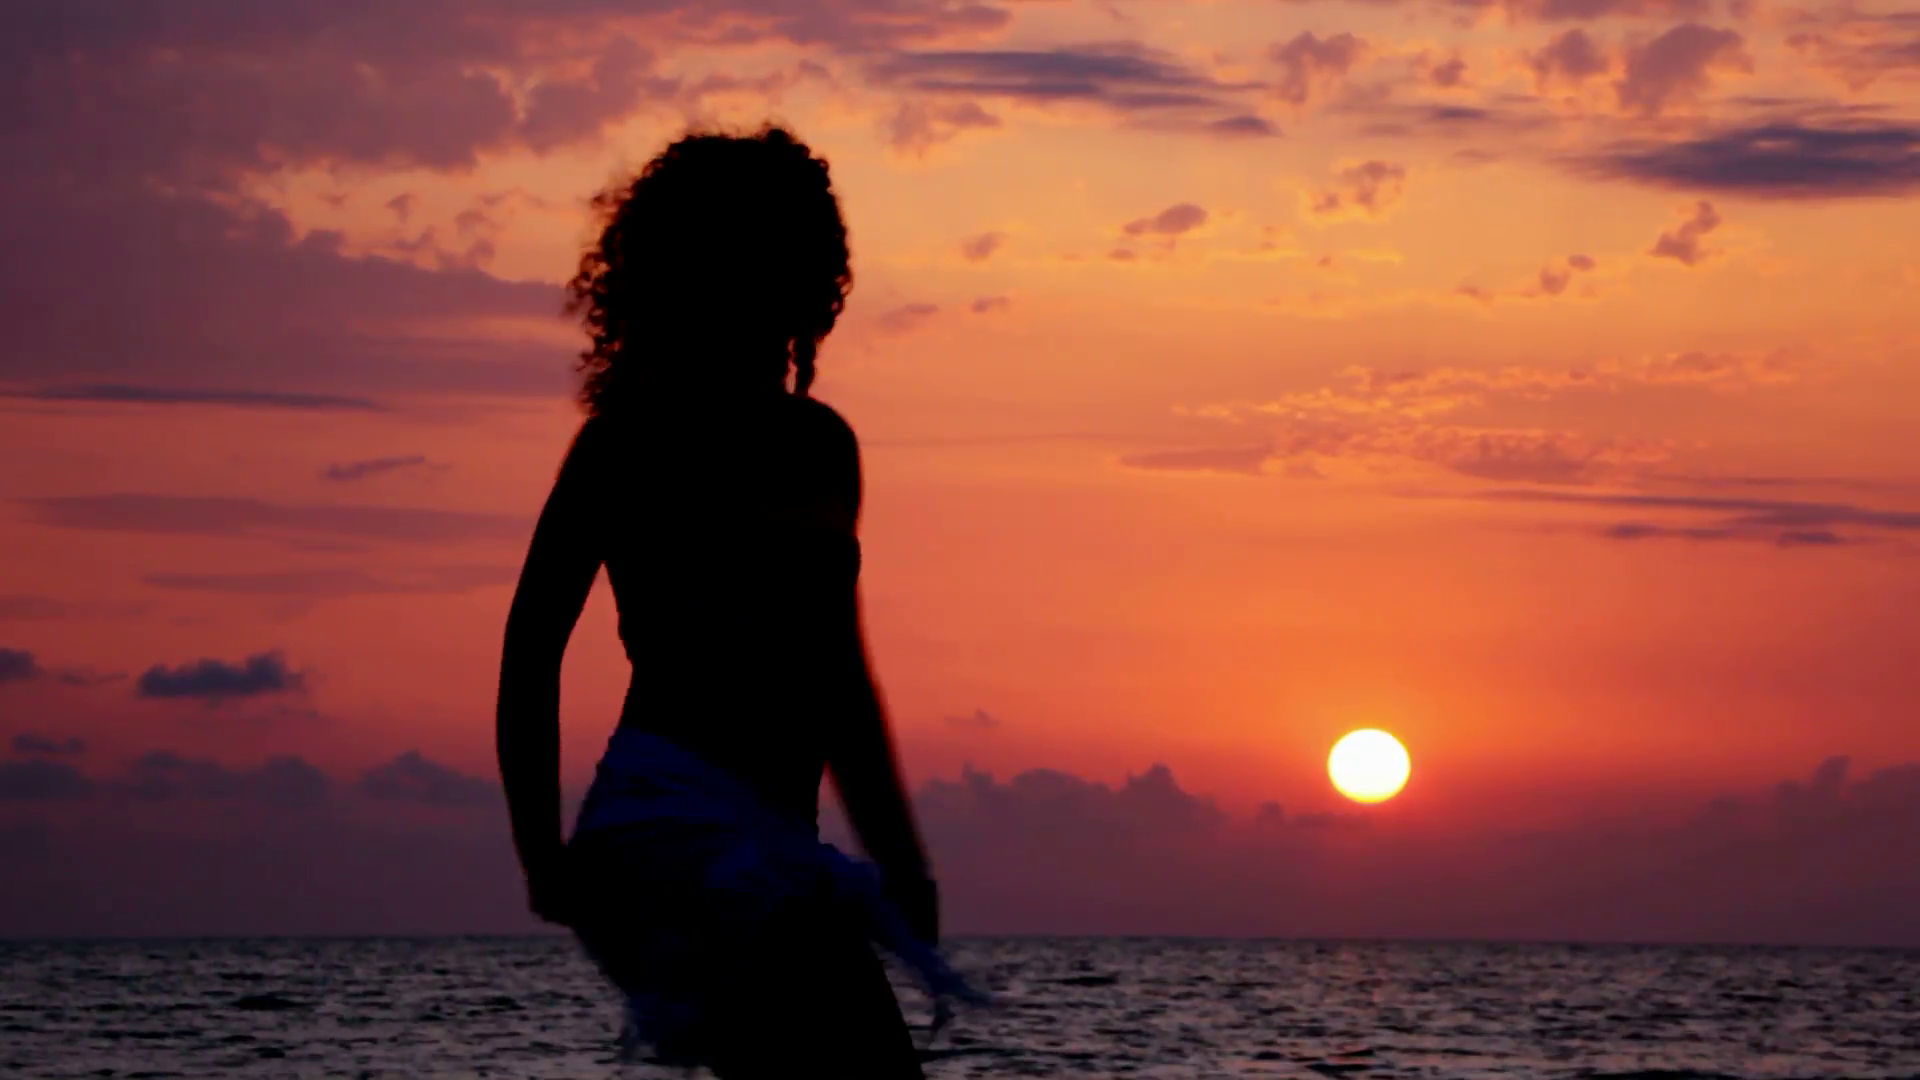 silhouette of young woman on beach, sunset sky and sea in background ...